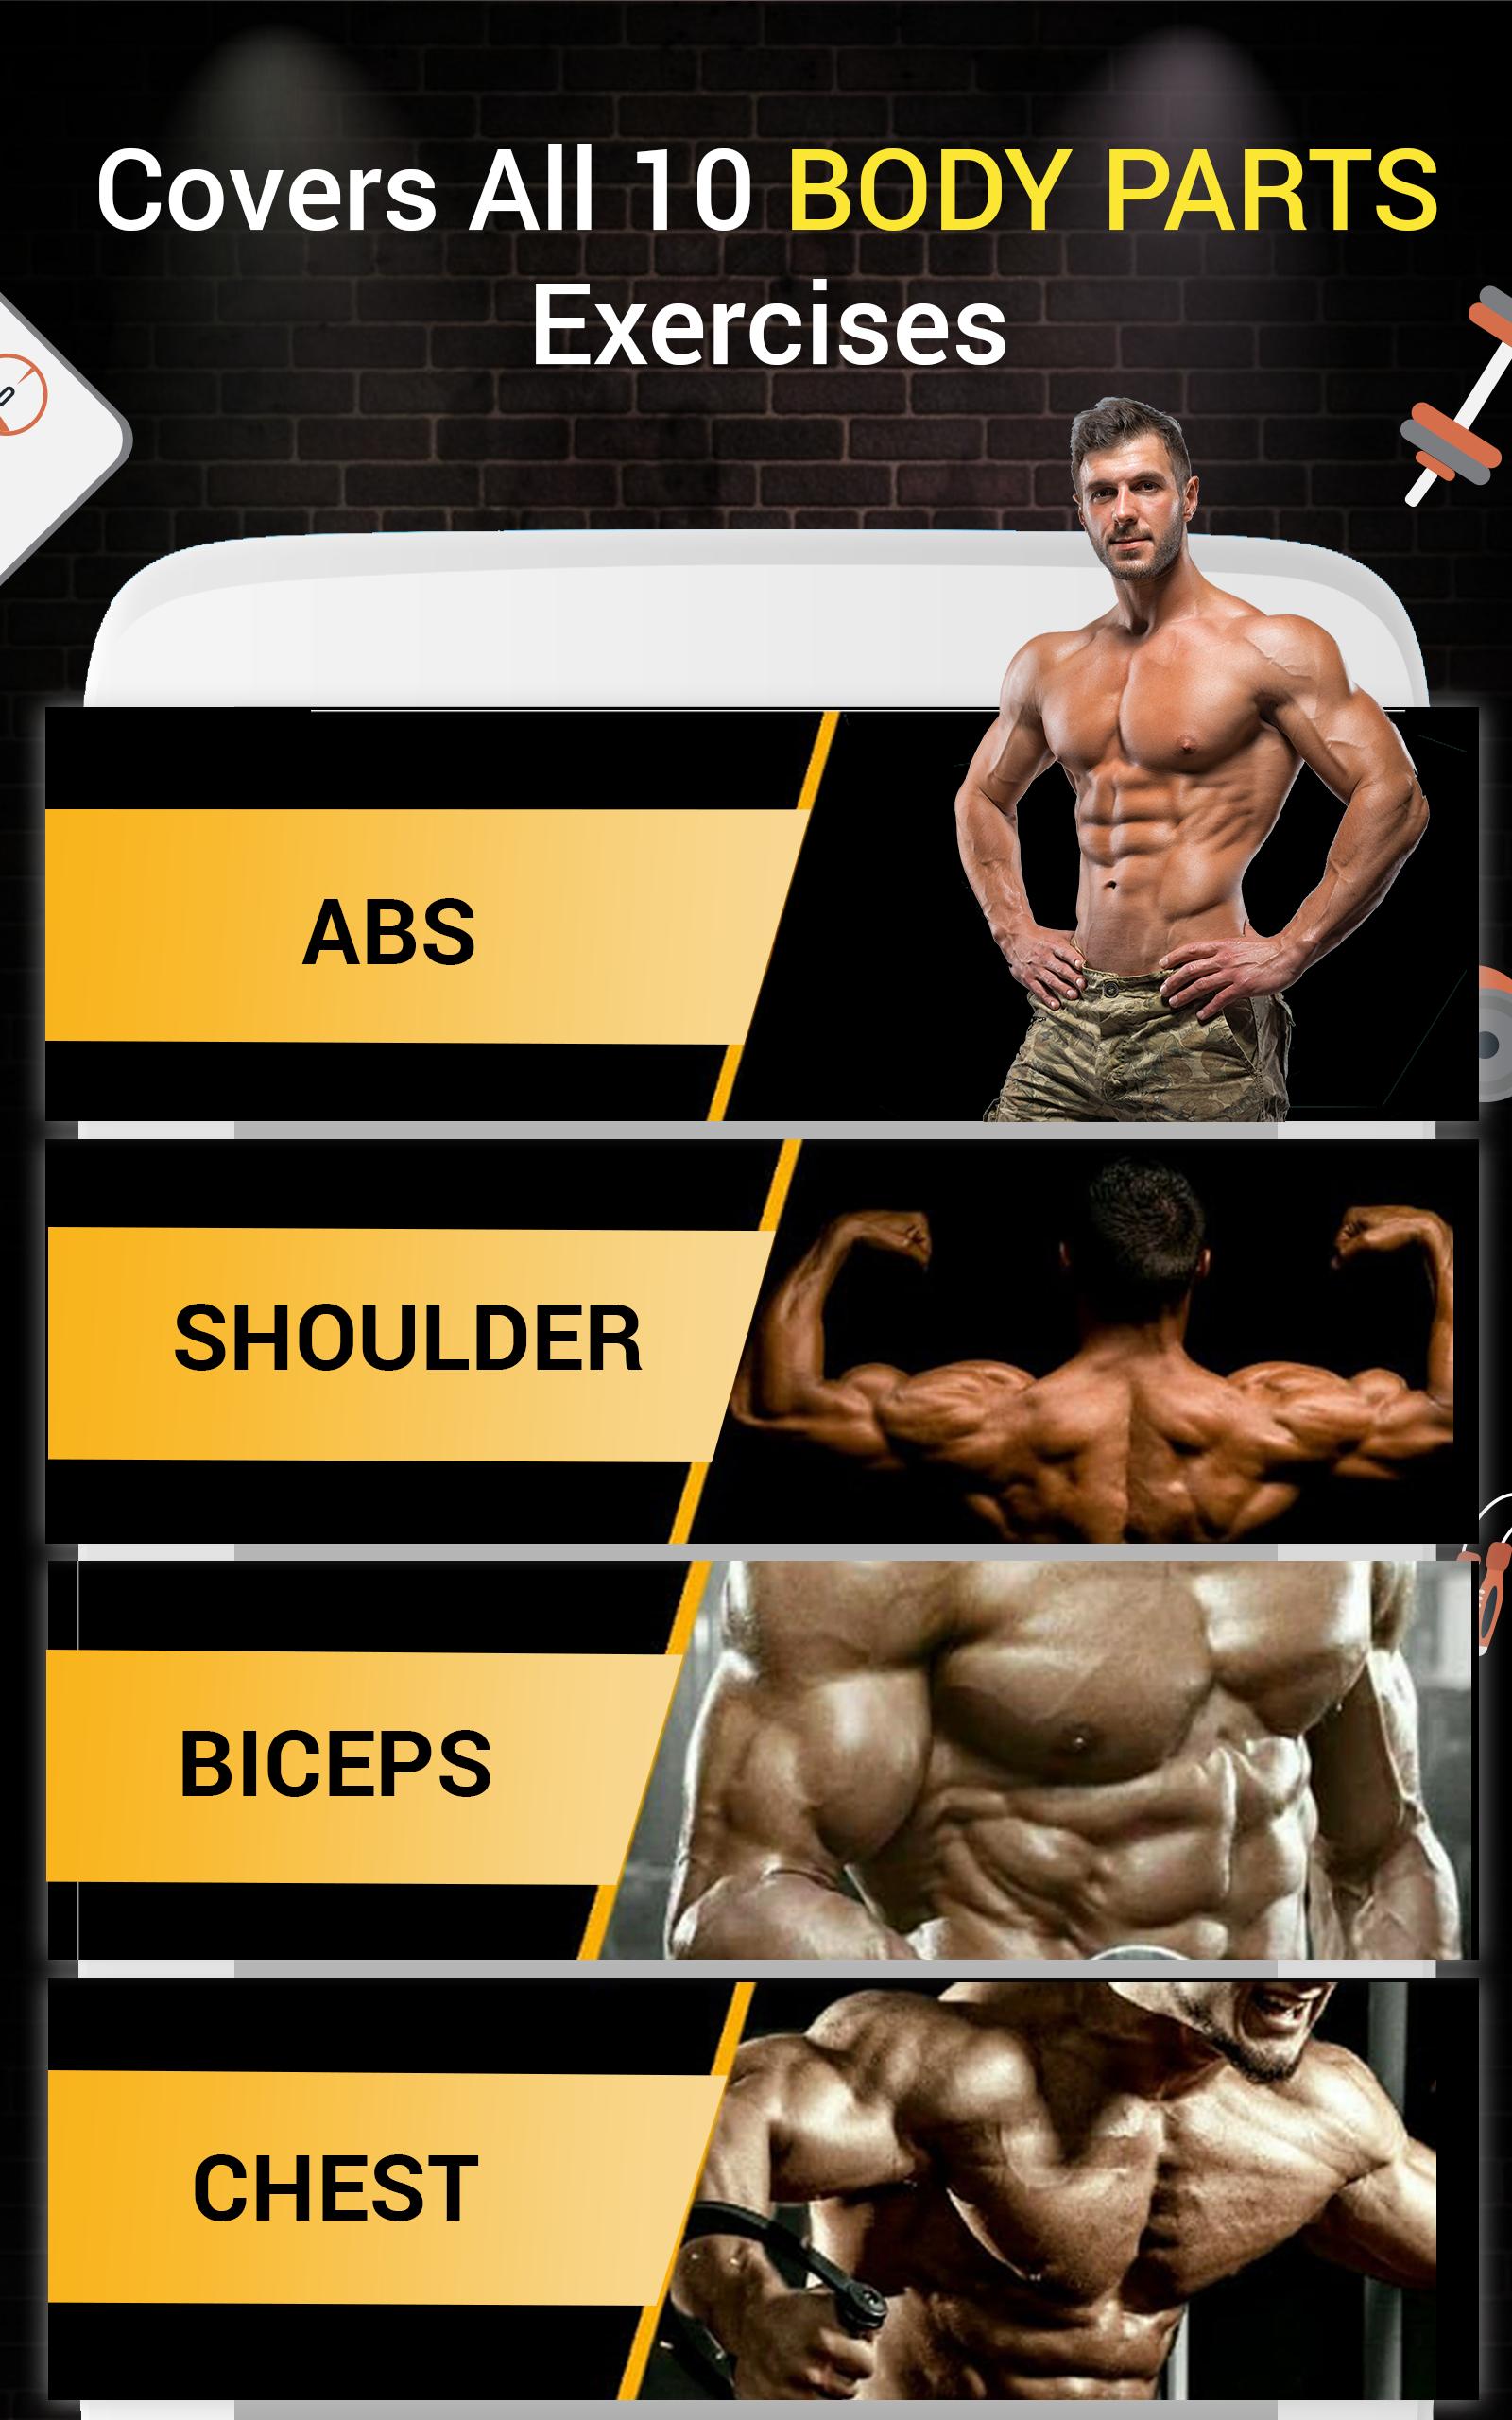 20 Minute Pro gym workout apk premium for at Office